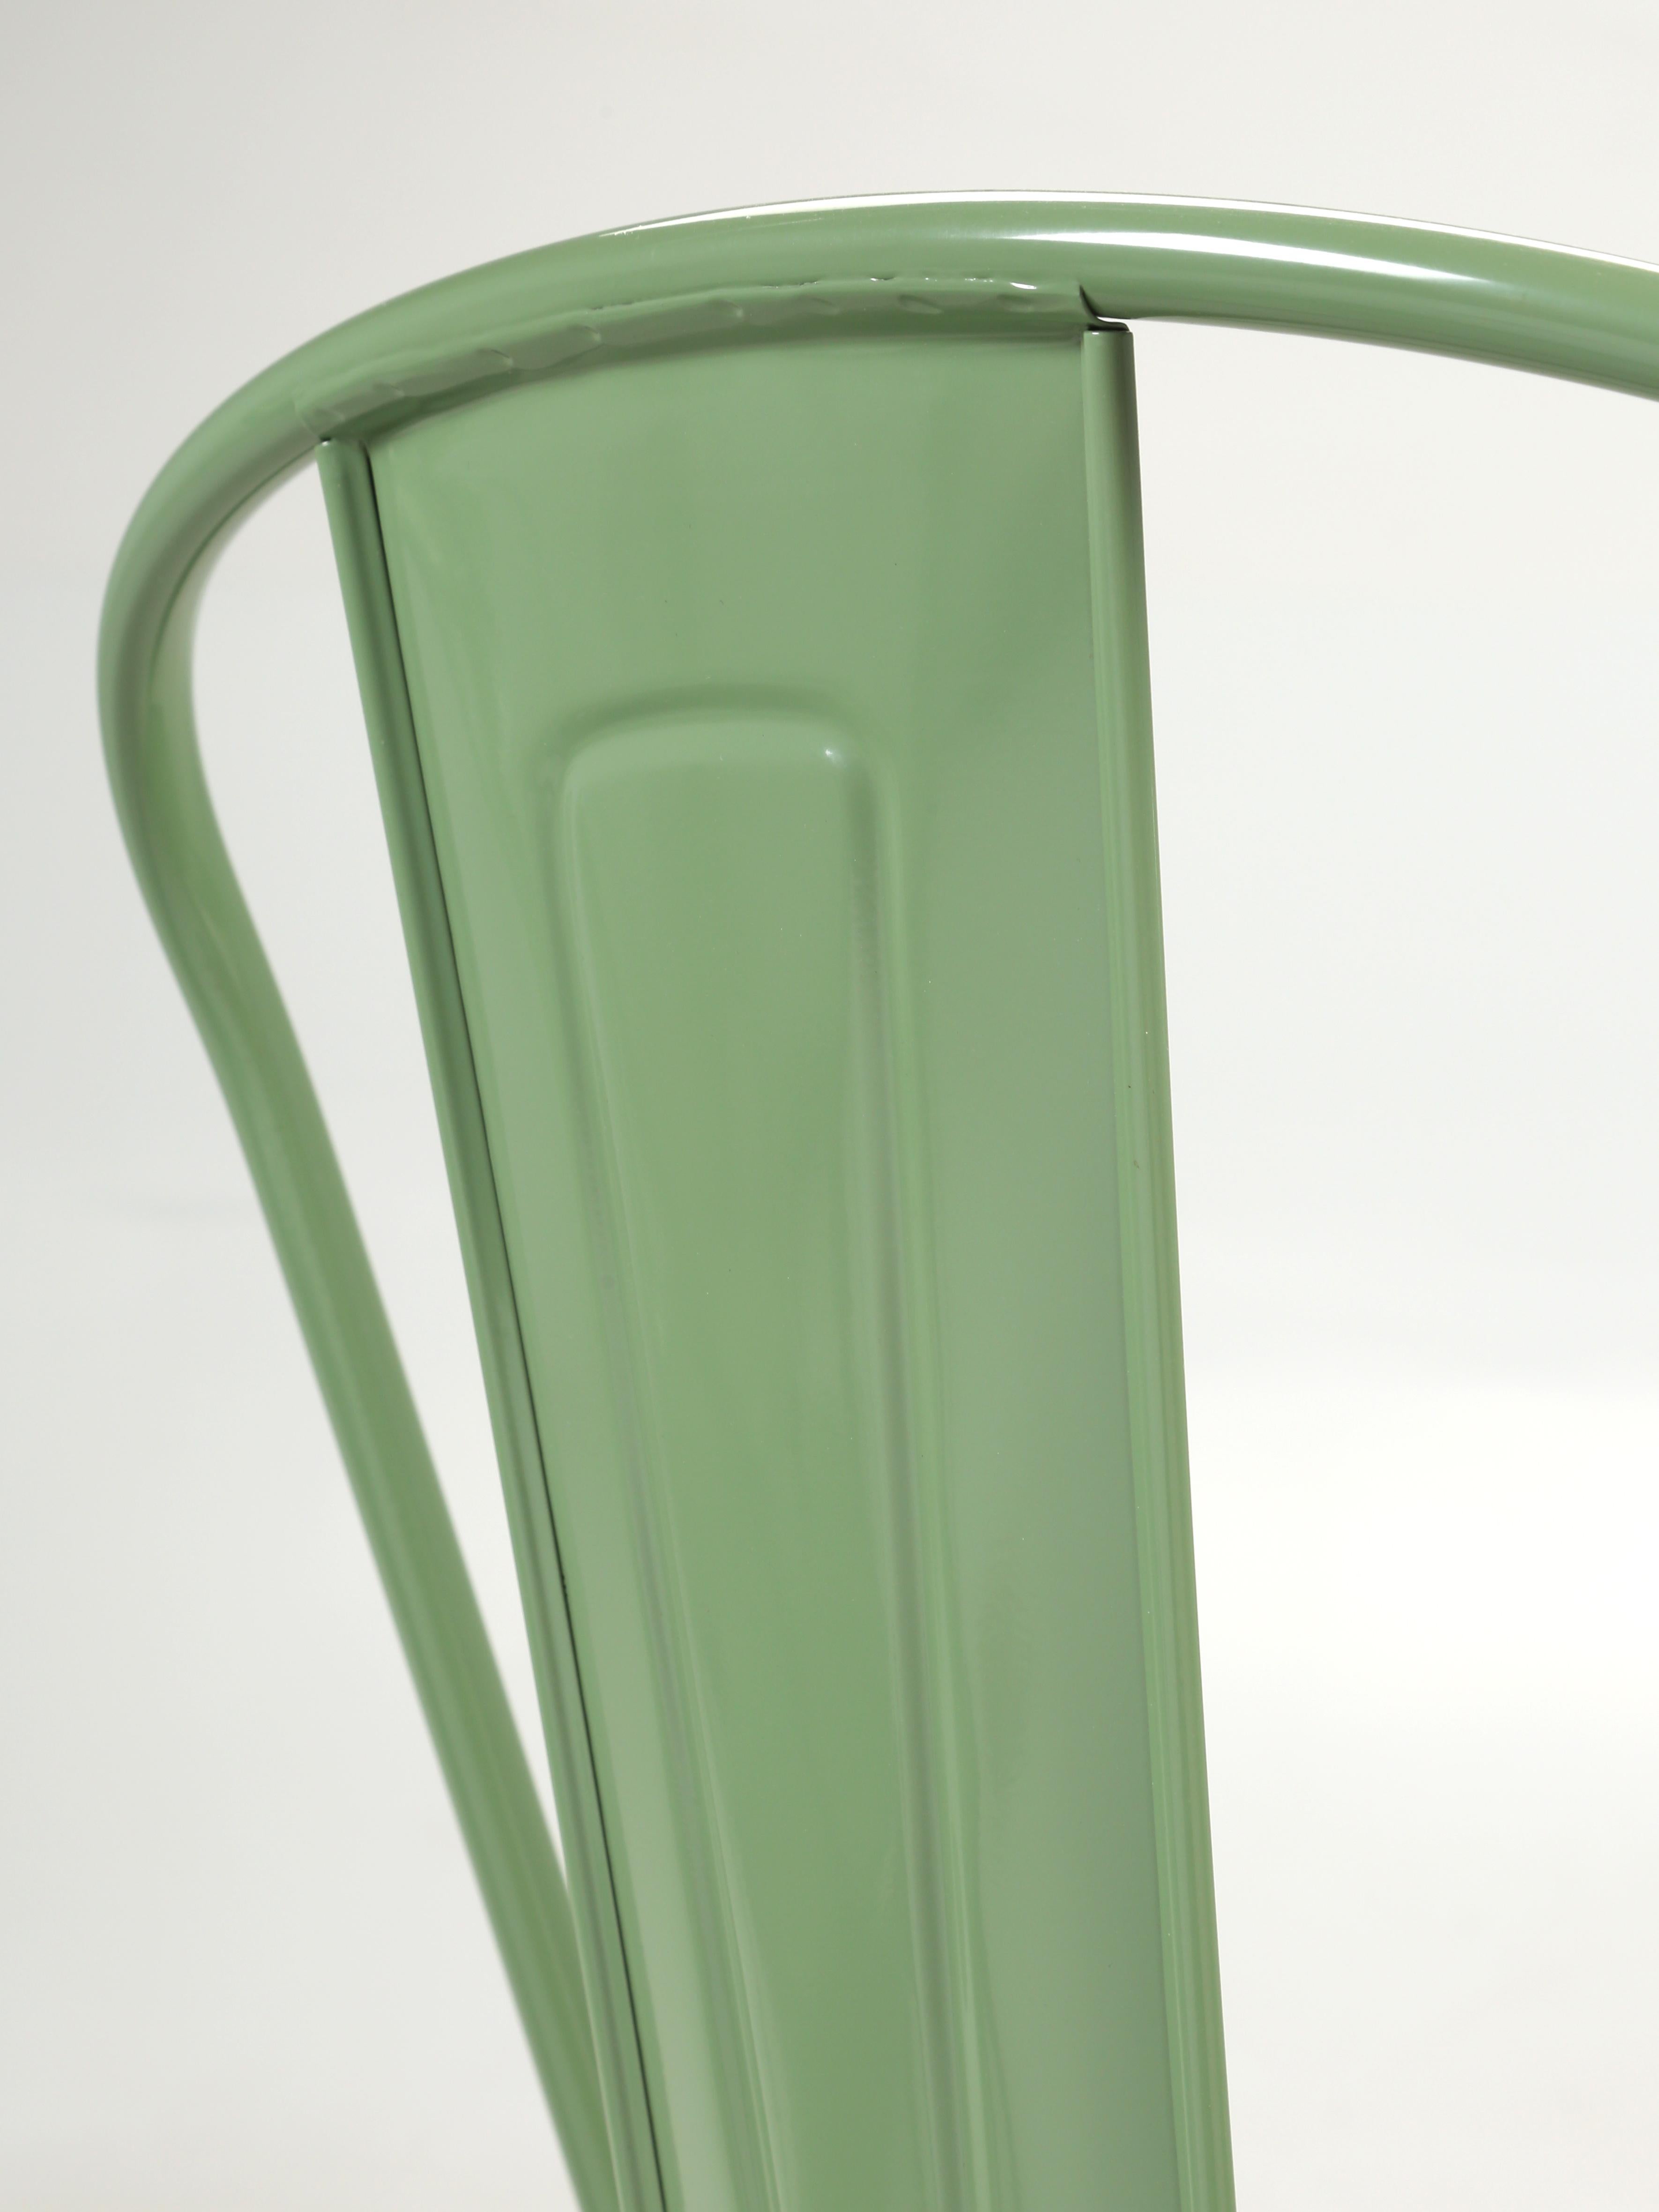 Contemporary Tolix Steel Stacking Chairs Set '6' French Hundred's Available Showroom Samples